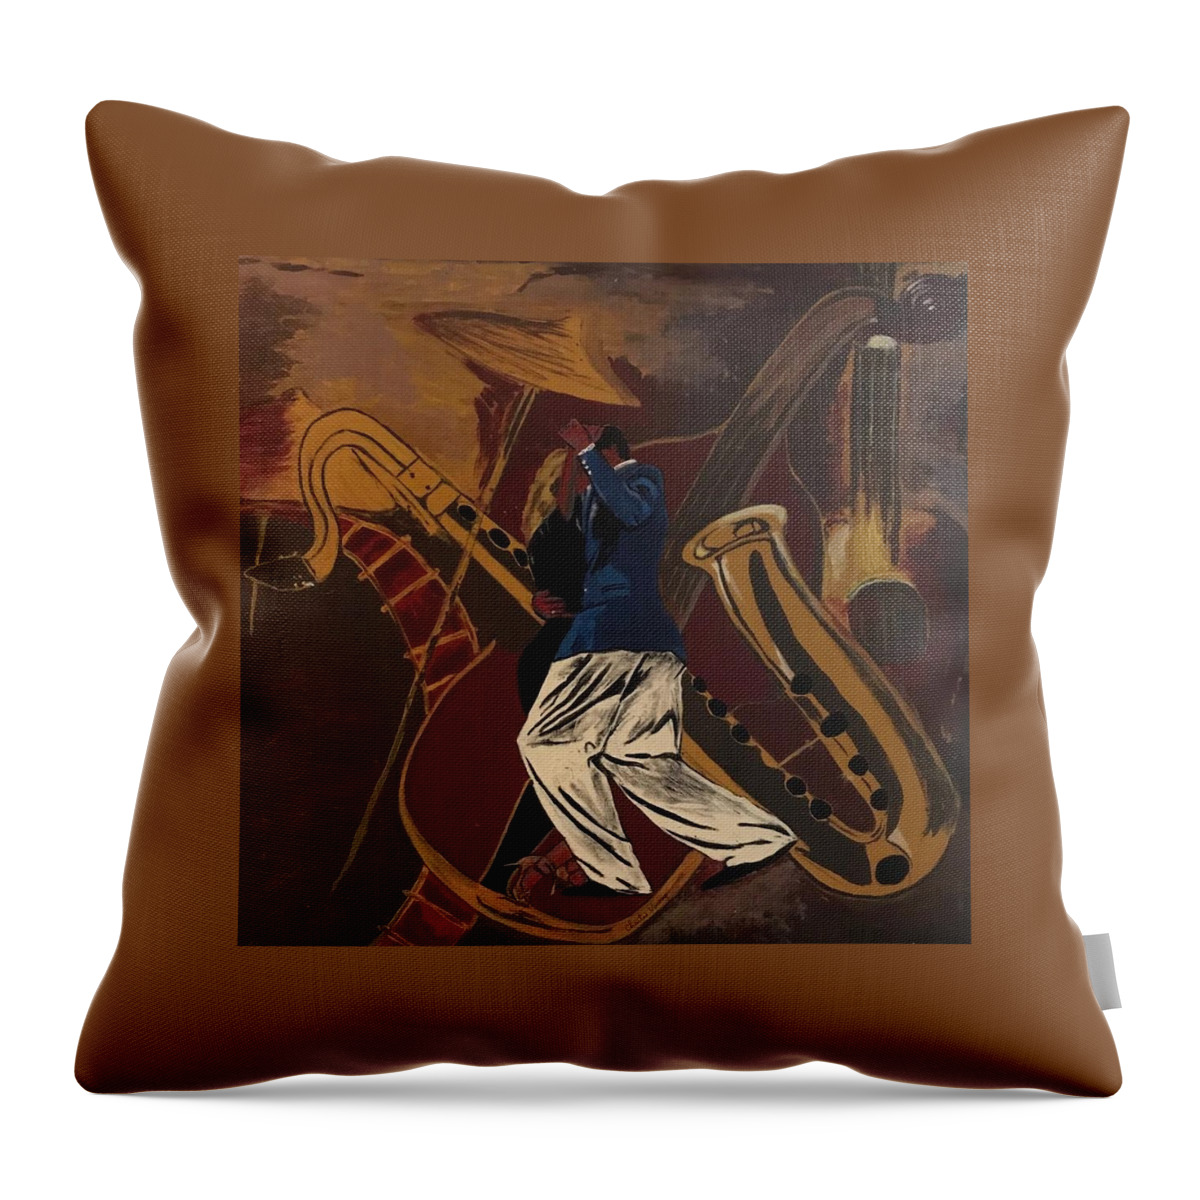  Throw Pillow featuring the painting Jazzin Man by Charles Young